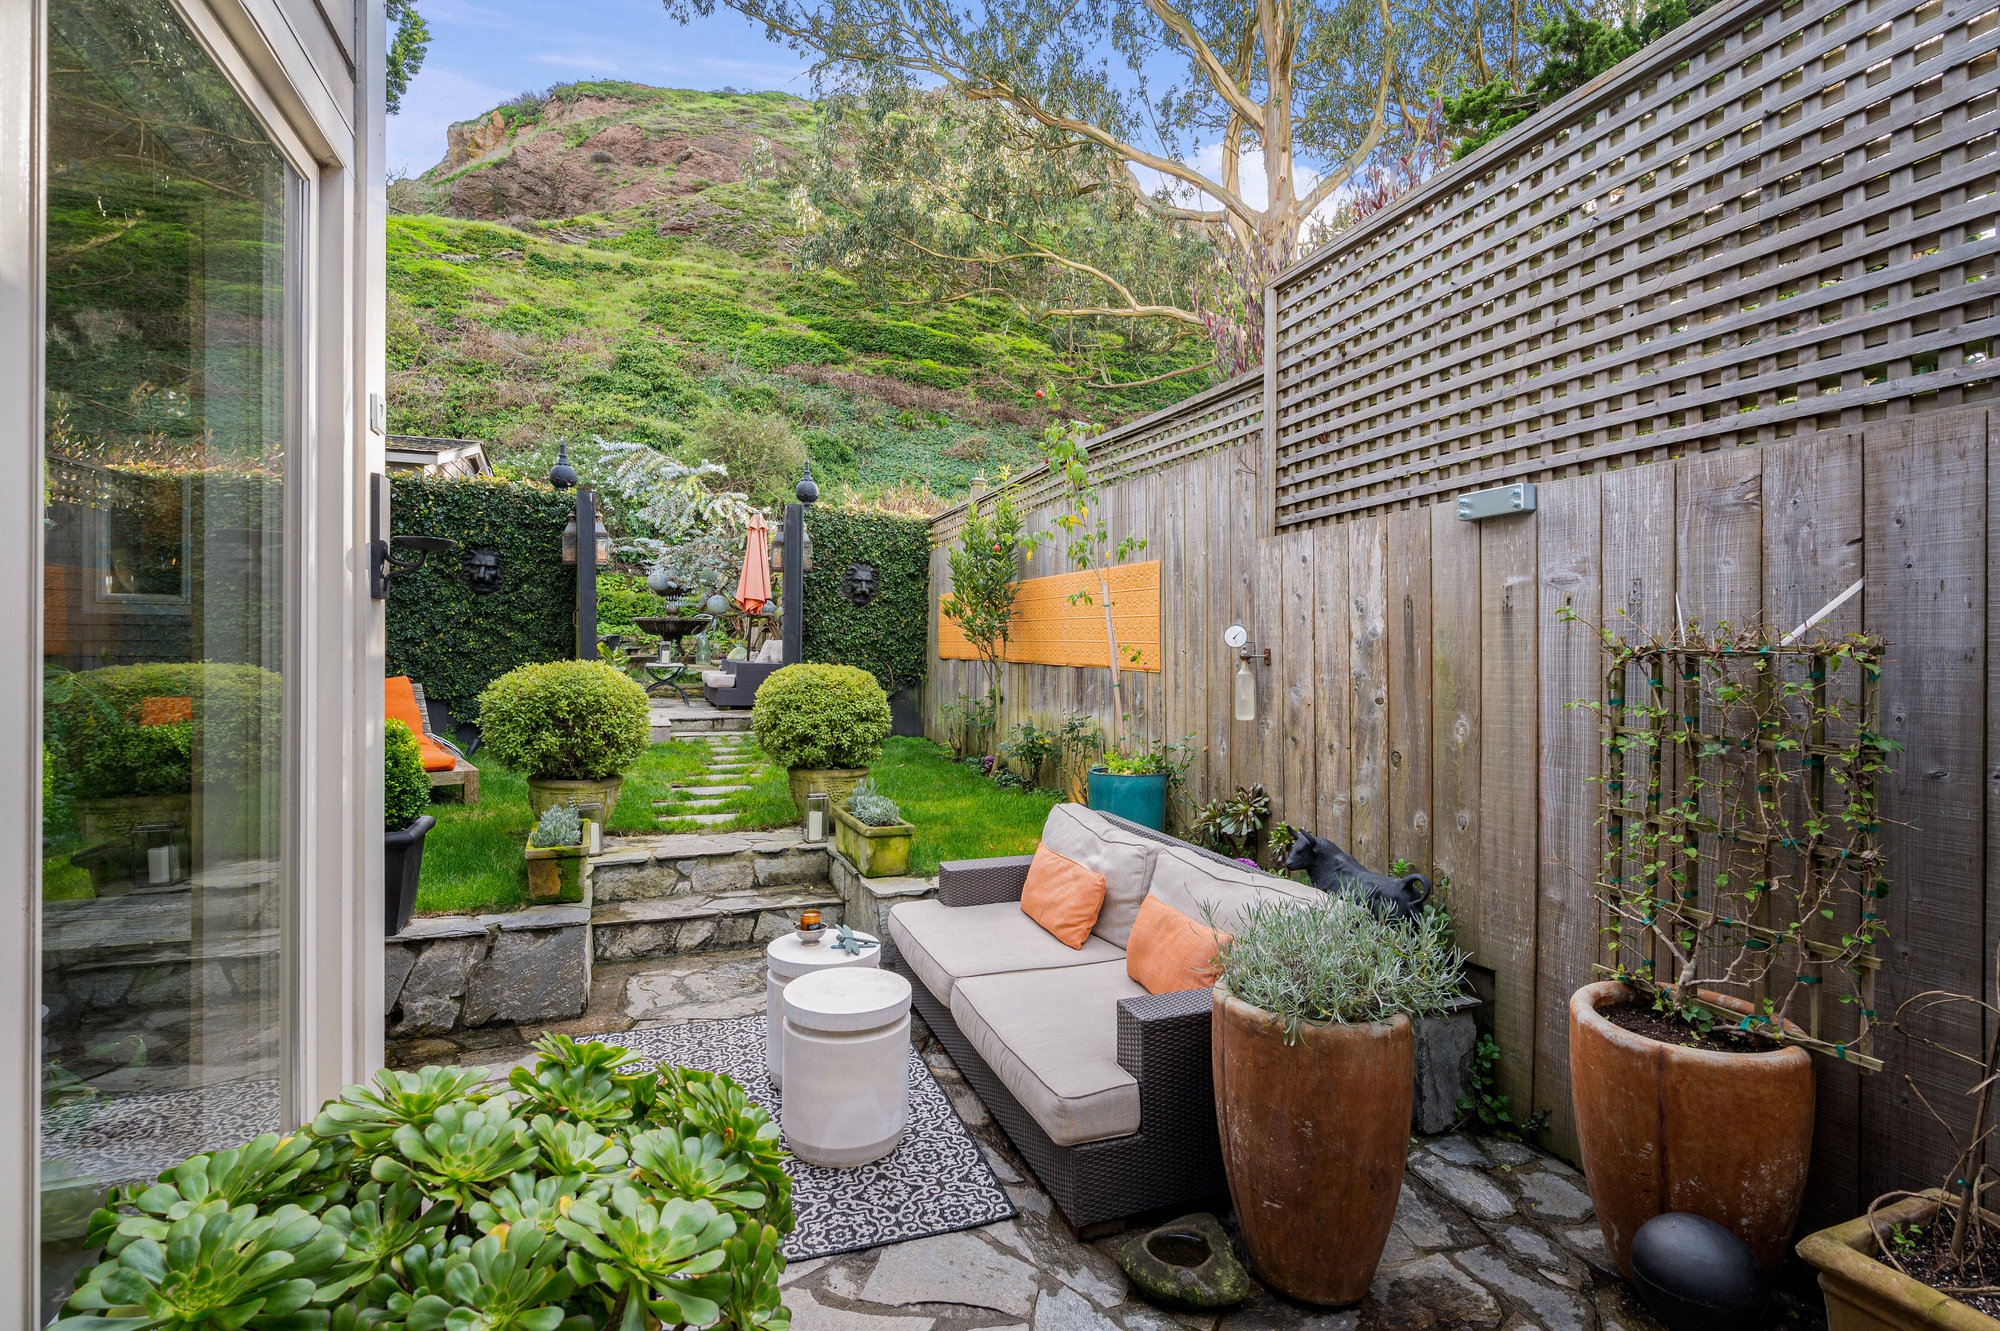 Property Photo: There is large wooden fence that allows for a lot of privacy in back yard.